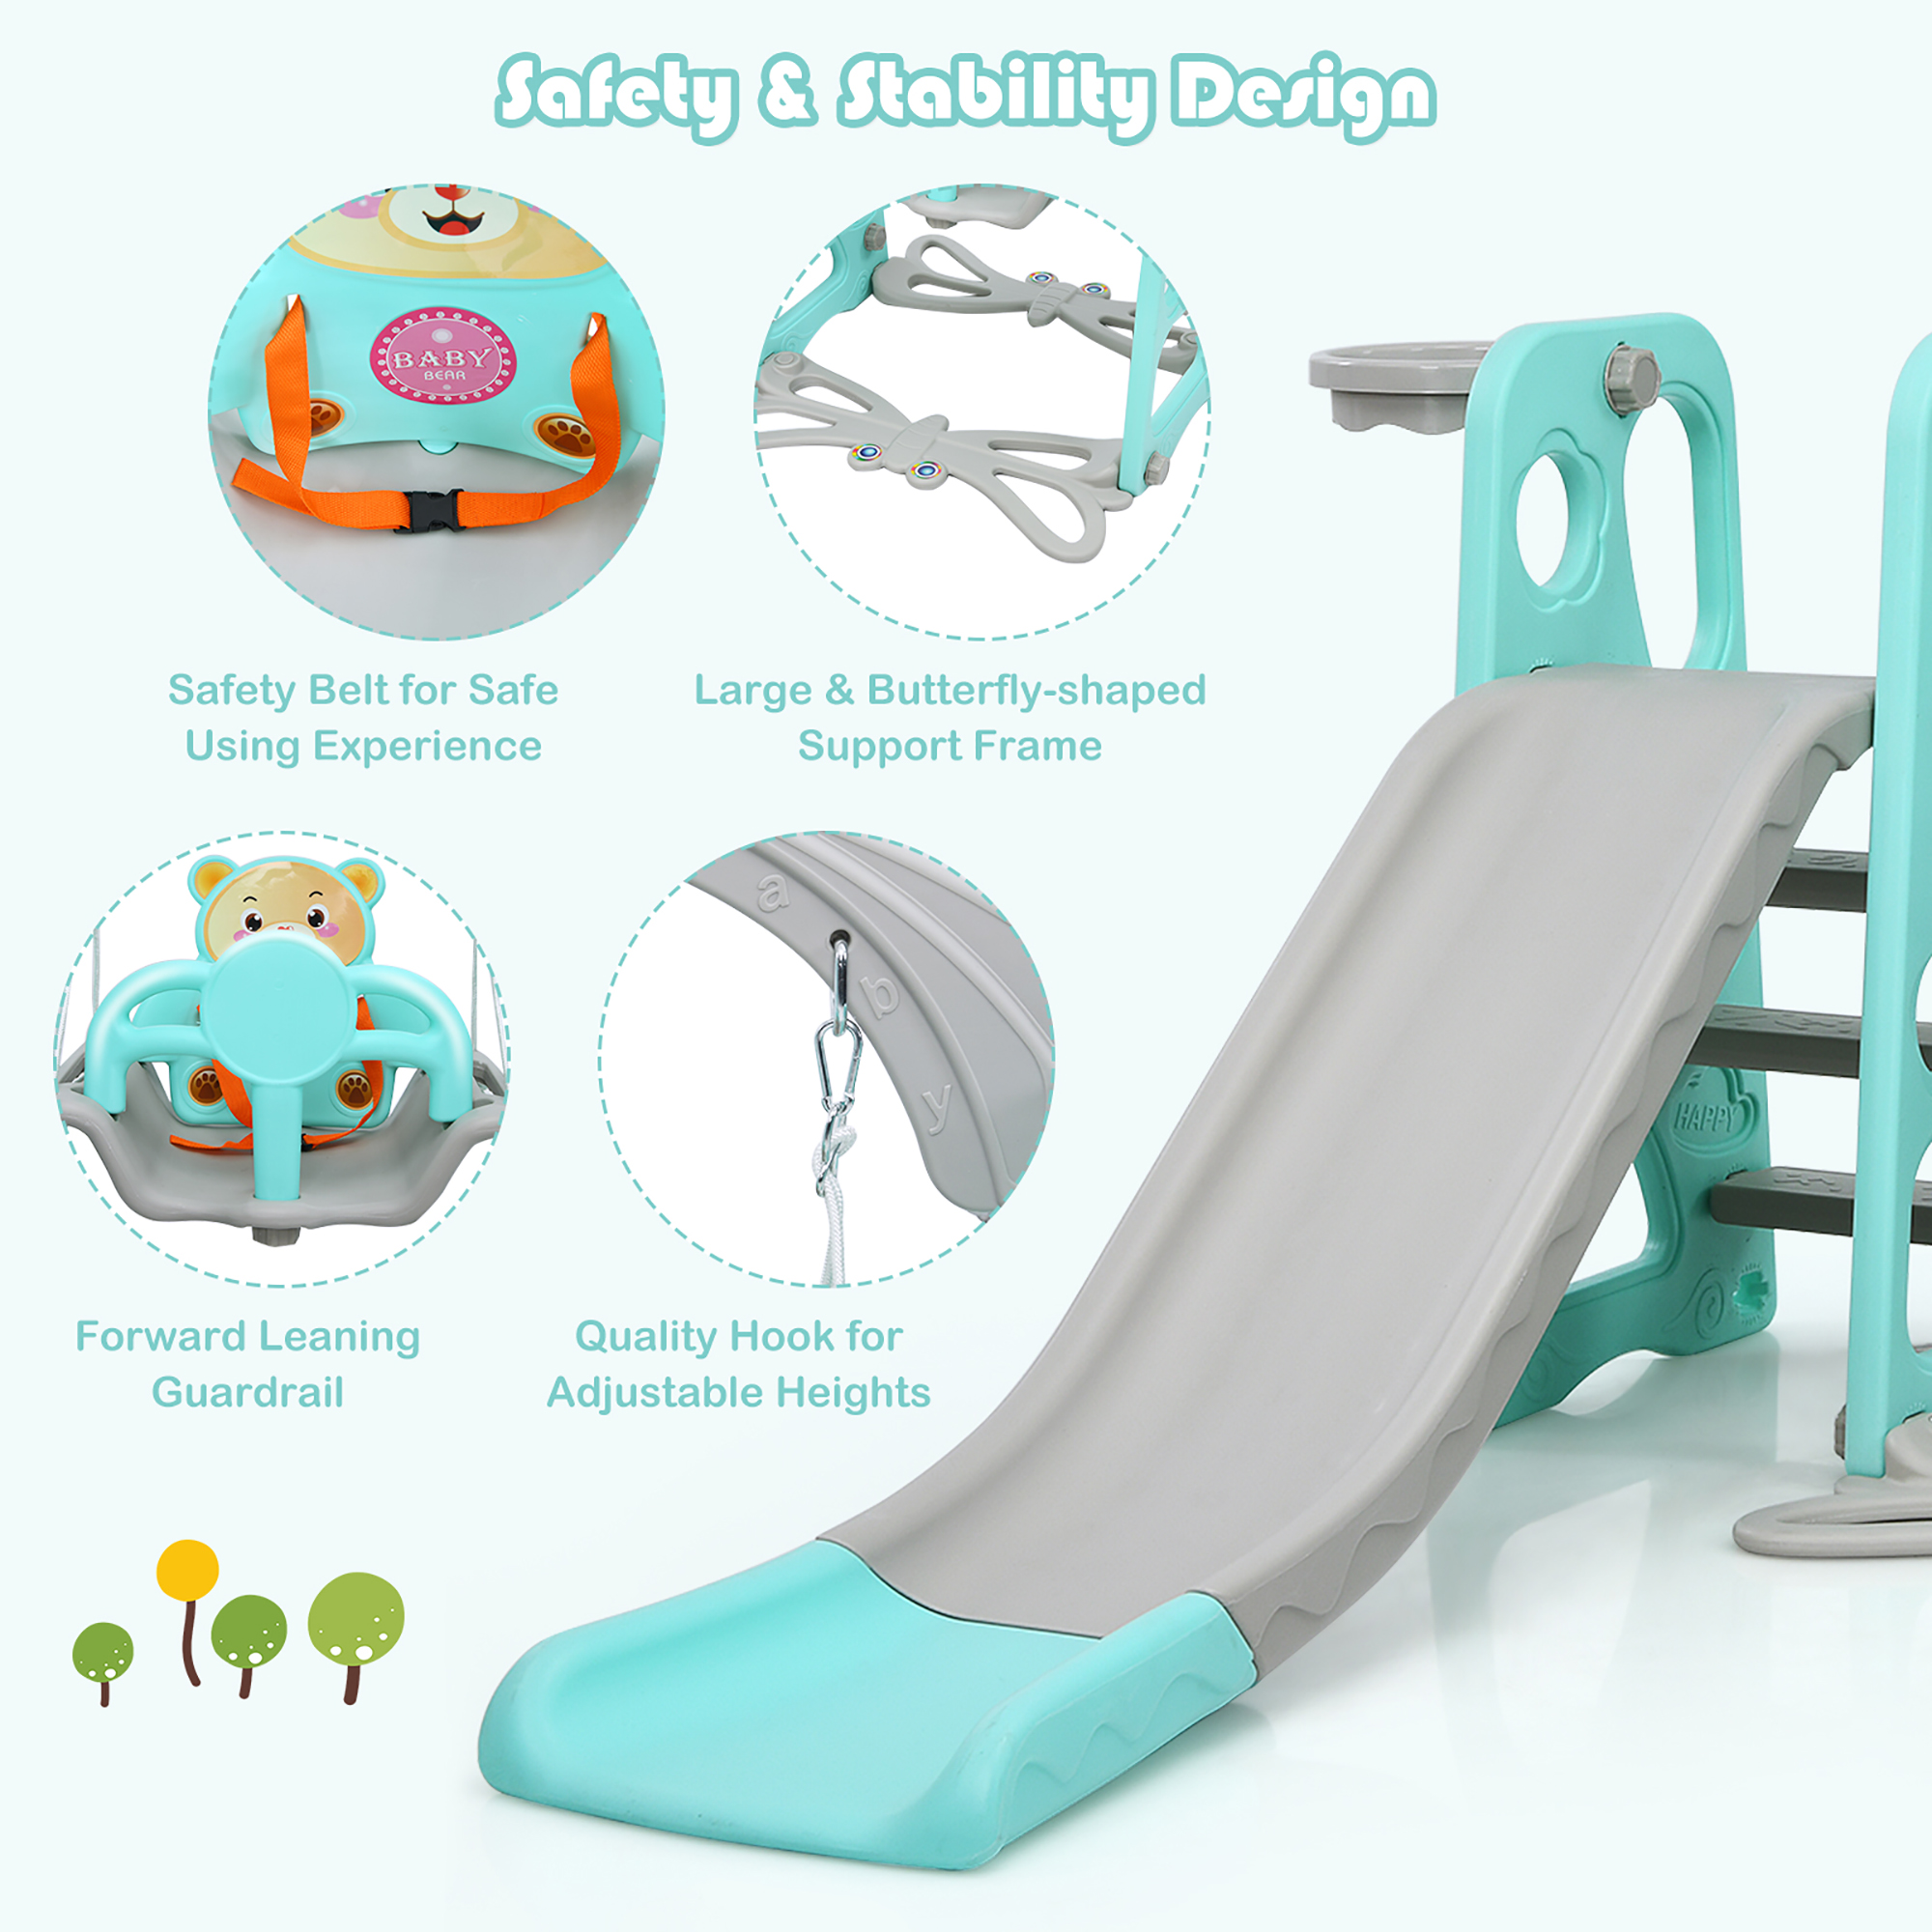 Babyjoy 4-in-1 Toddler Climber and Swing Set w/ Basketball Hoop & Ball Green - image 5 of 10